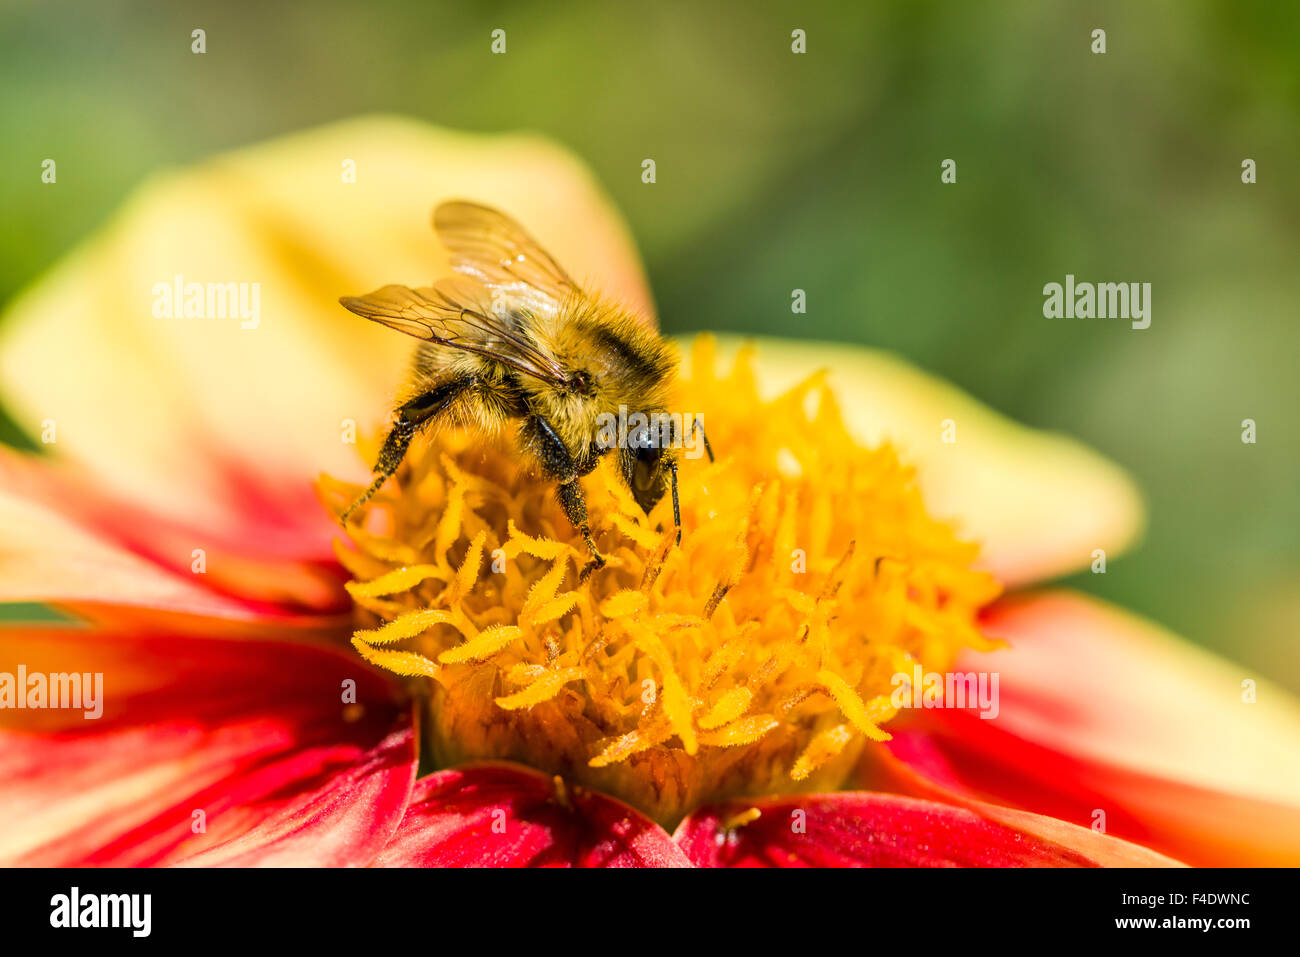 A Common carder bee (Bombus pascuorum) is collecting nectar from a Dahlia (Asteraceae) blossom Stock Photo